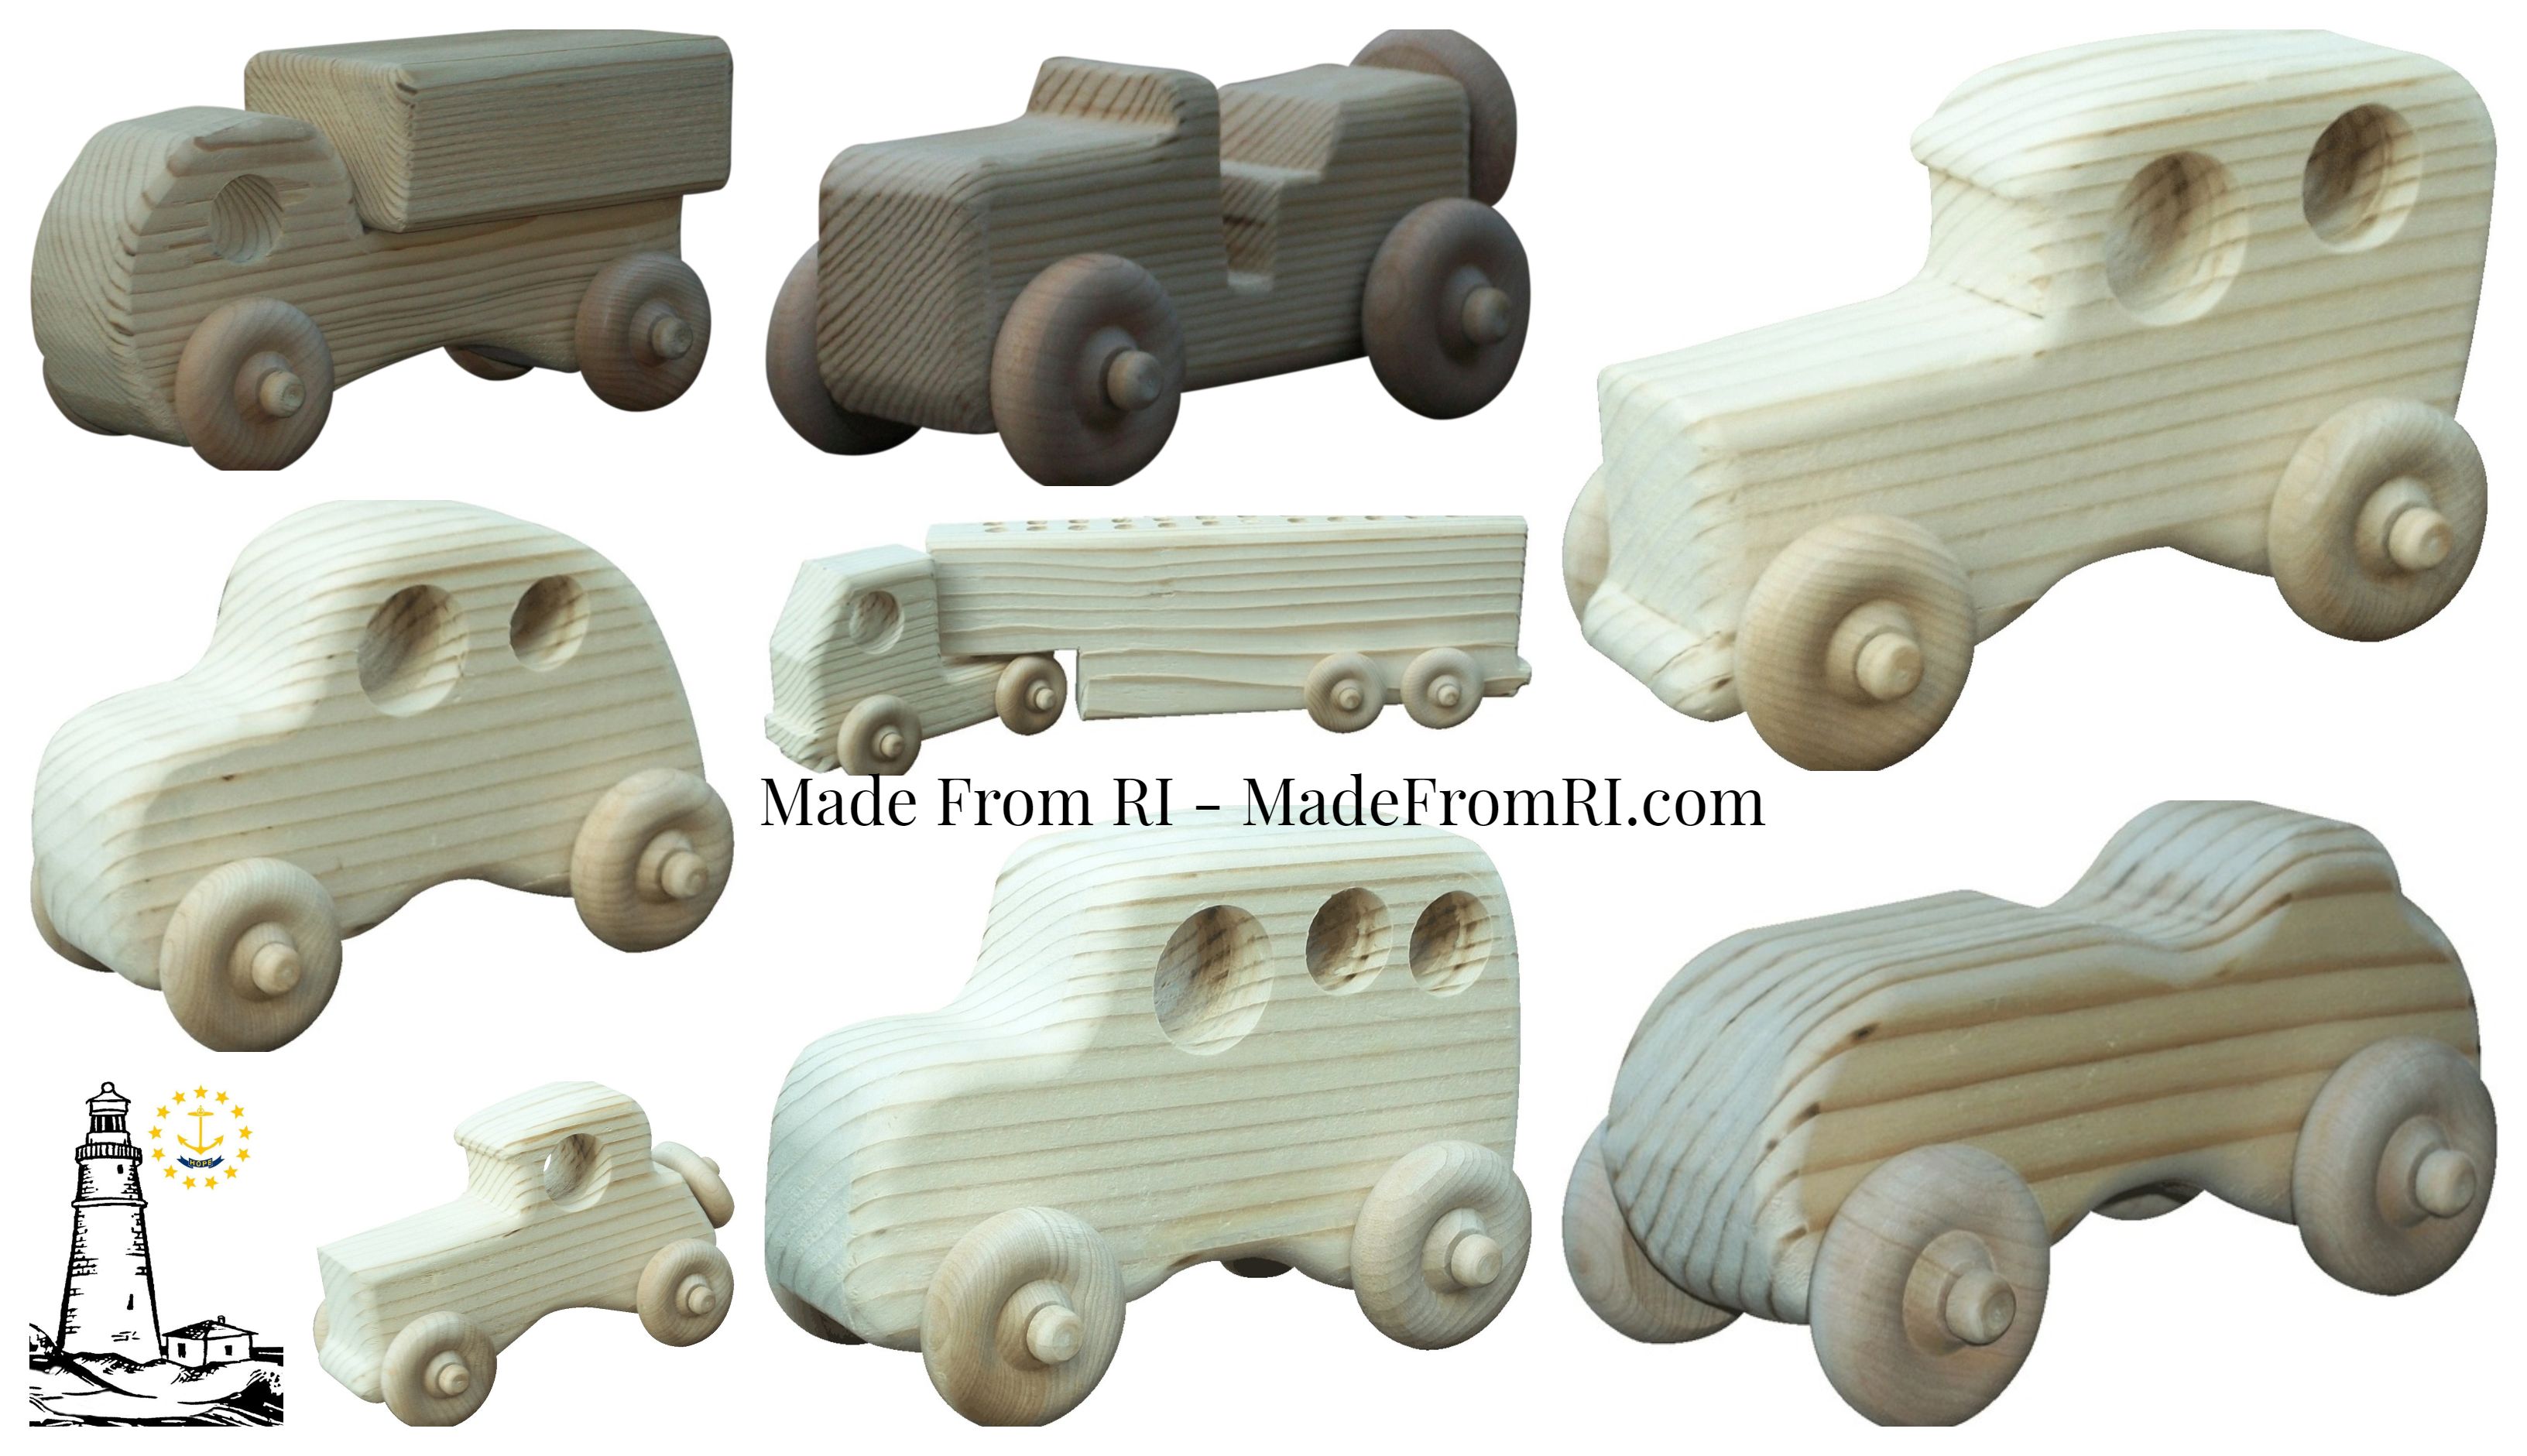 Made From RI Wooden Toys